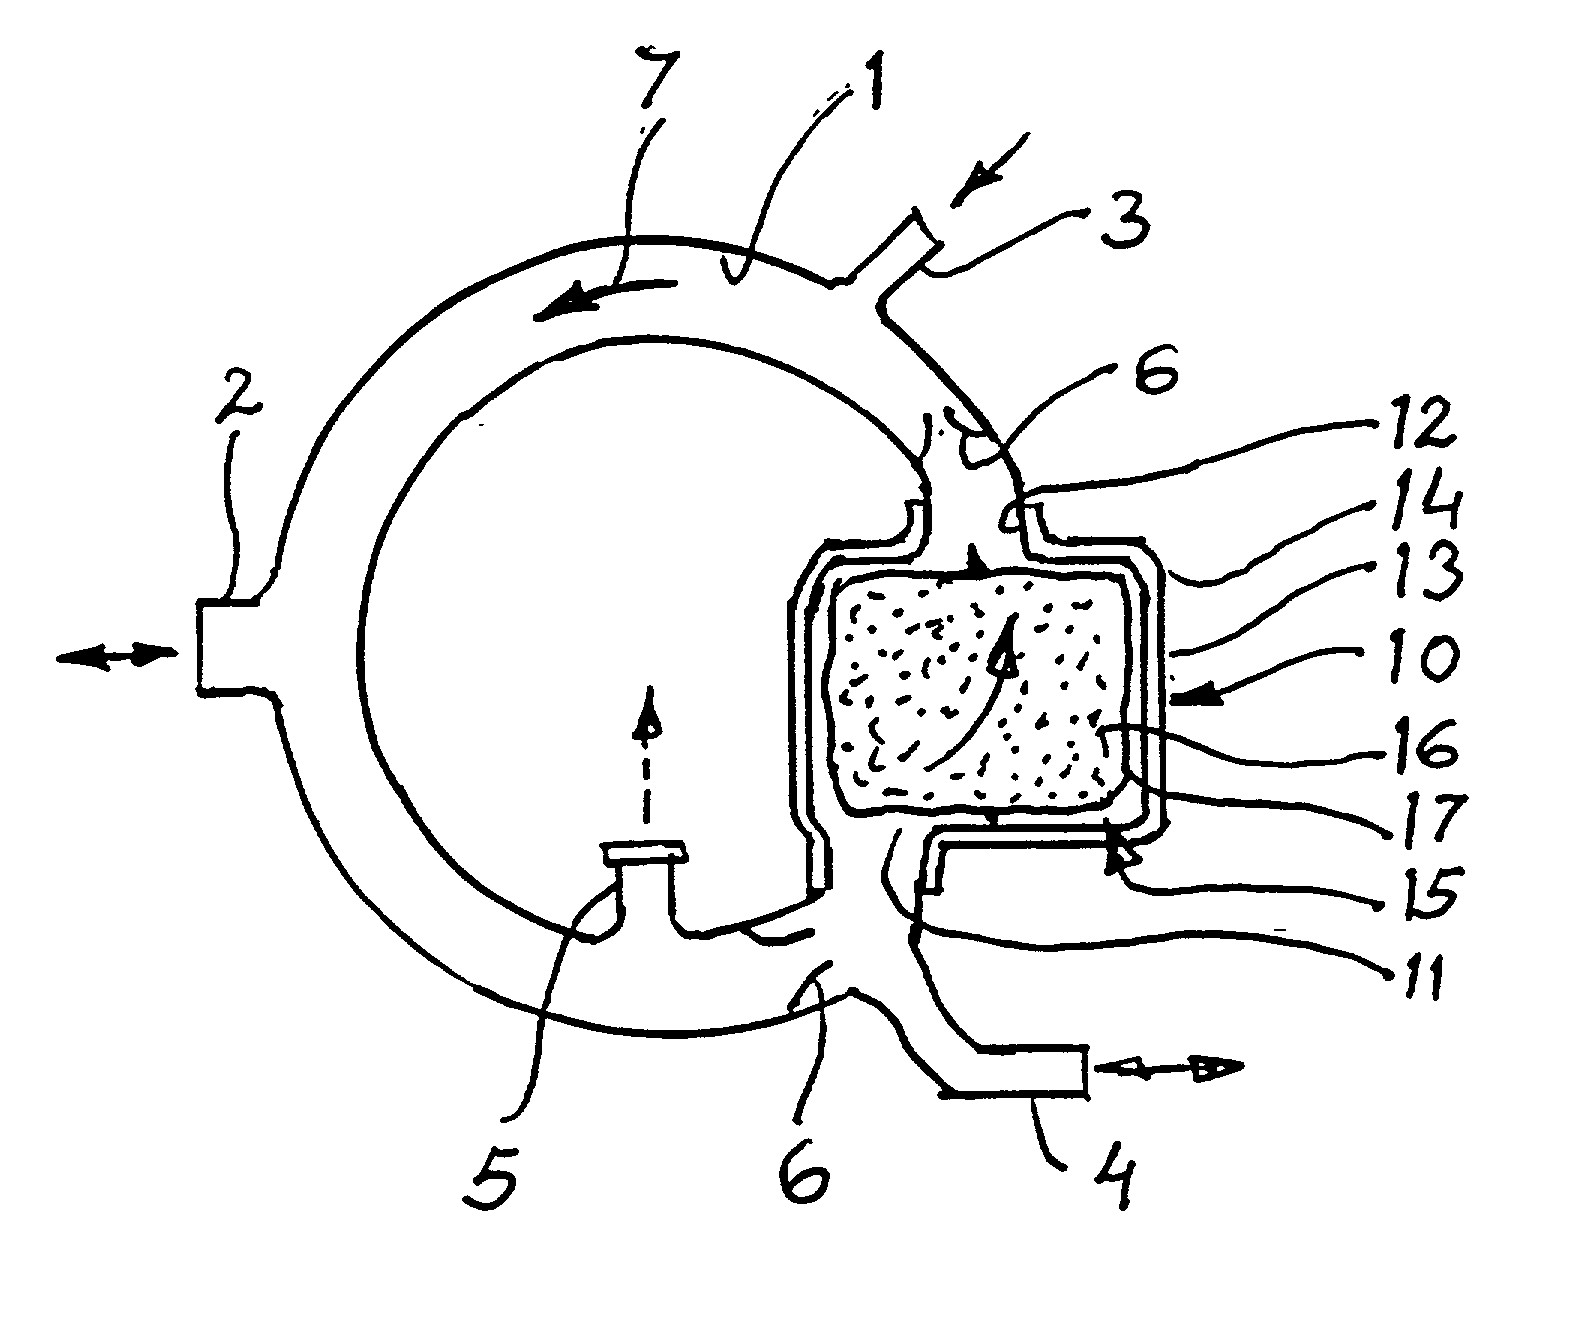 Device for anaesthetic systems